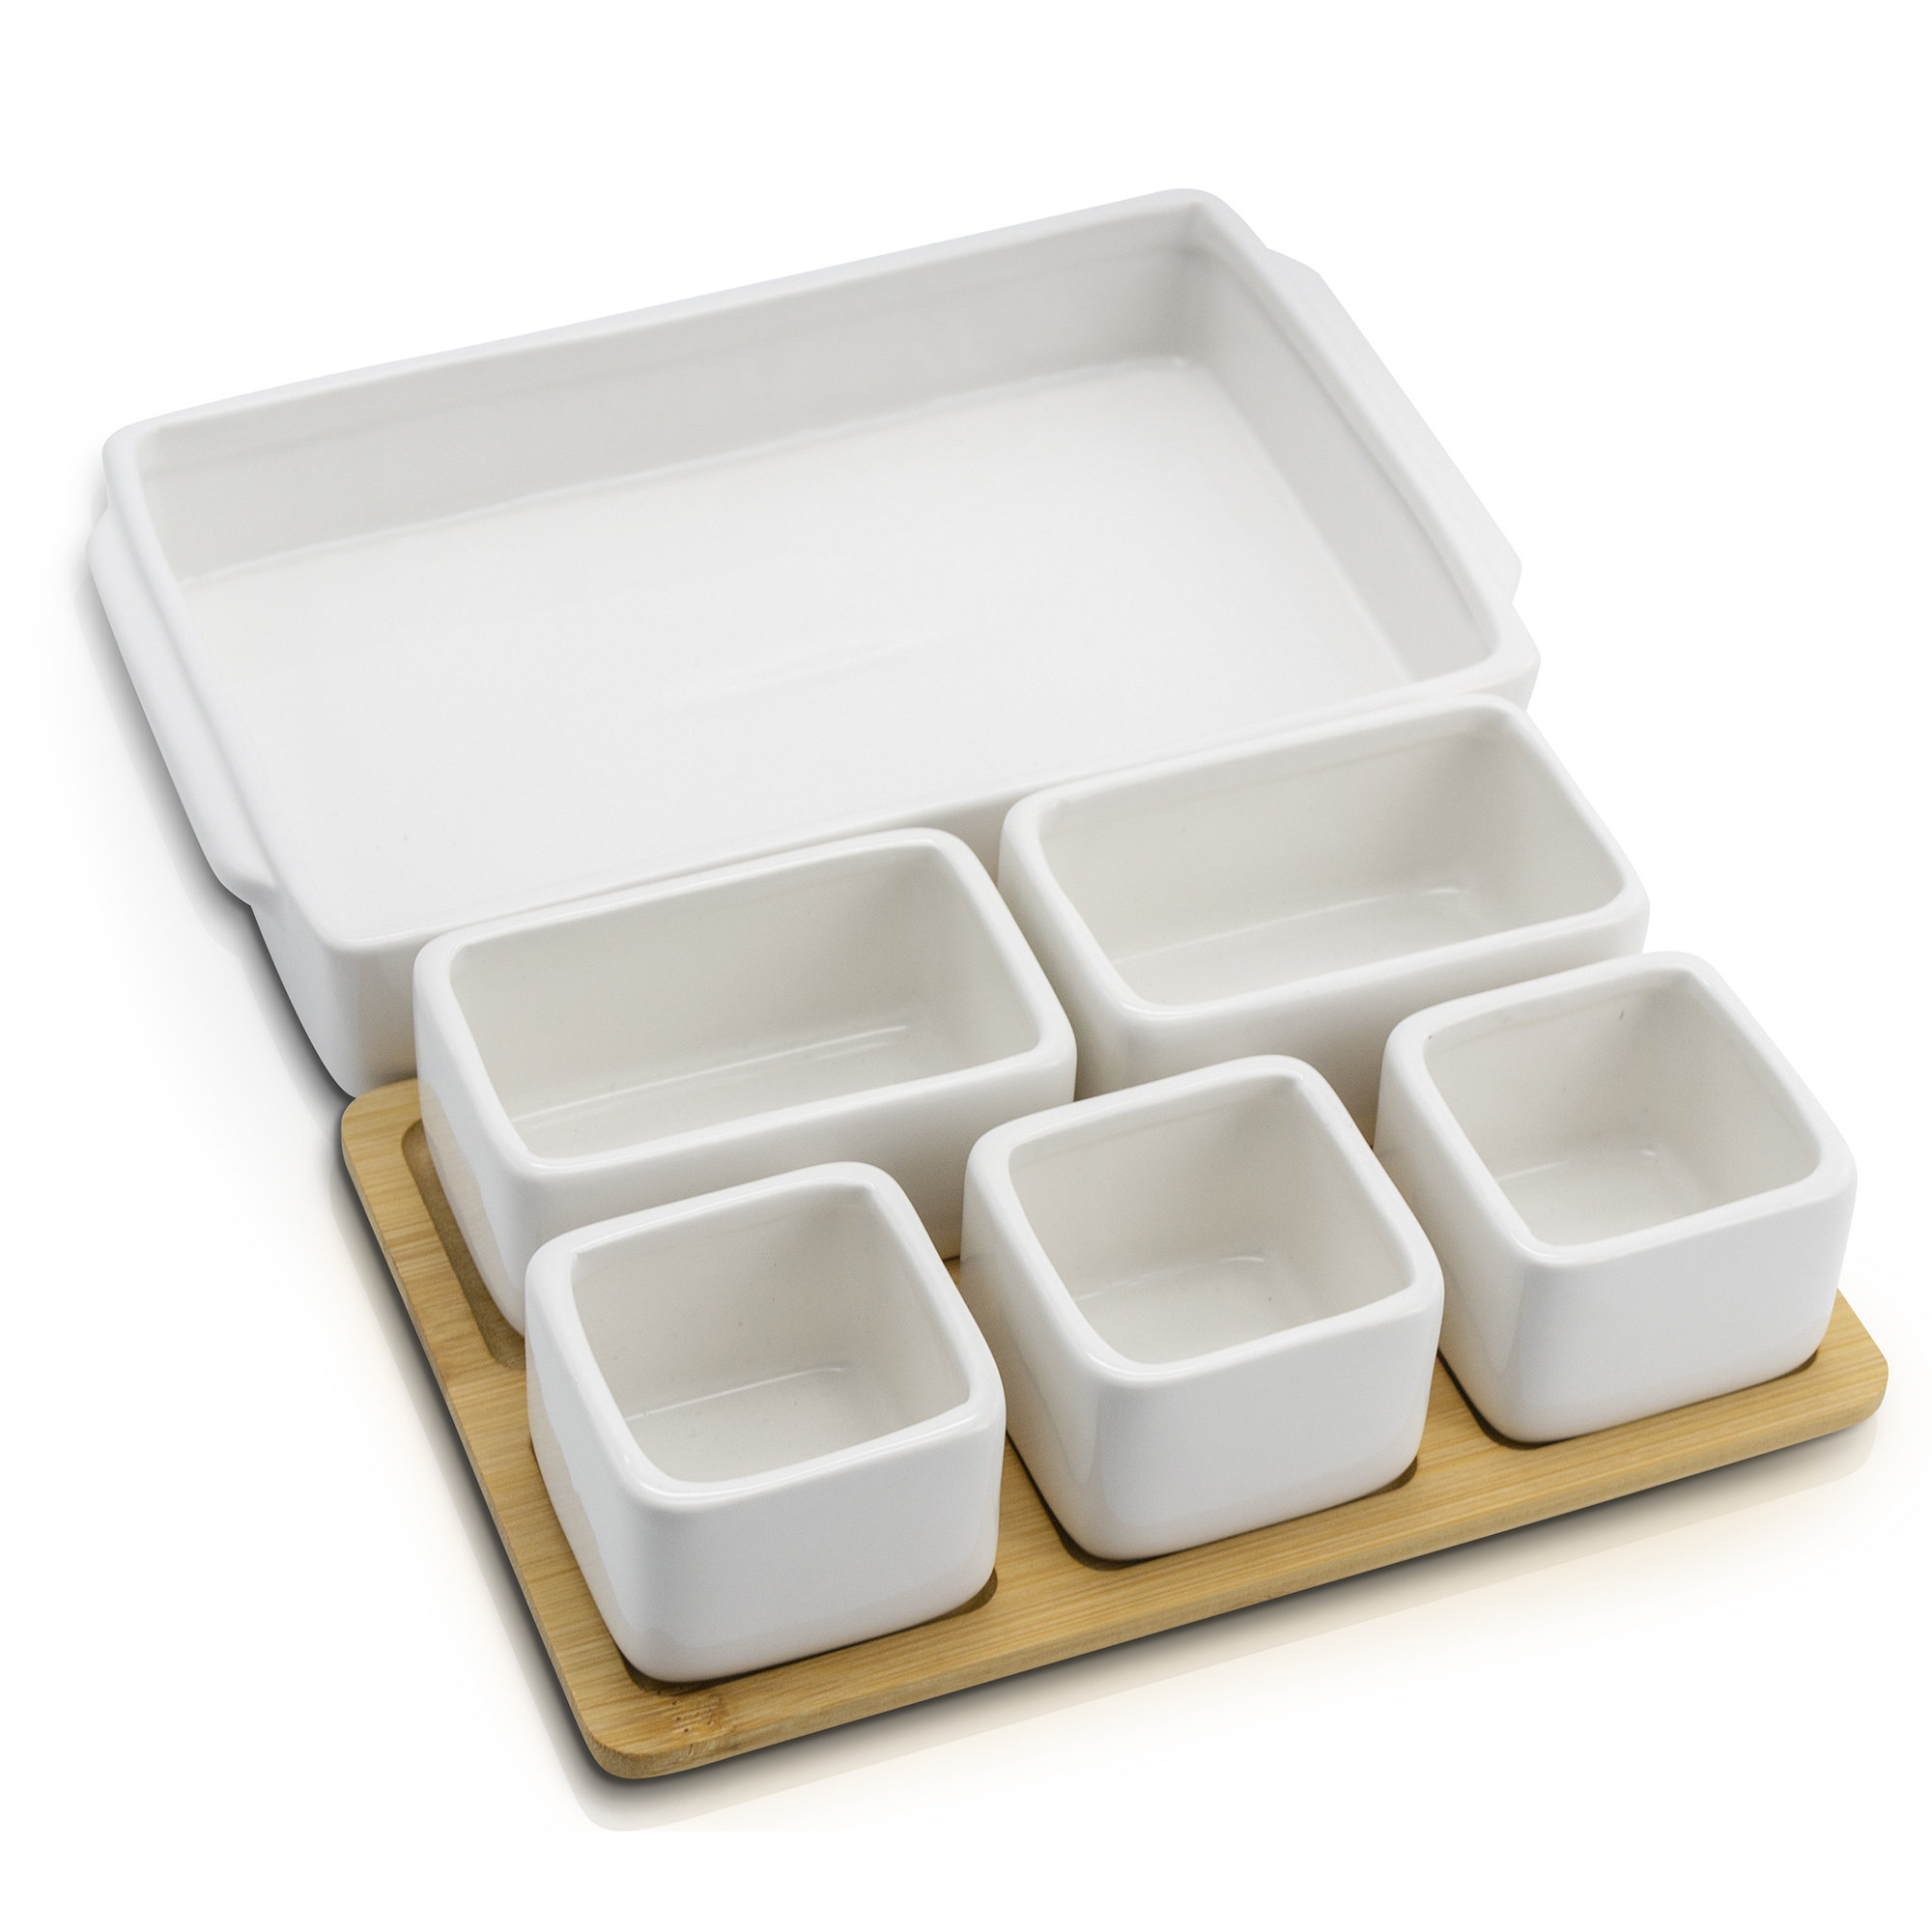 Serving Trays, Bowls & Dishes